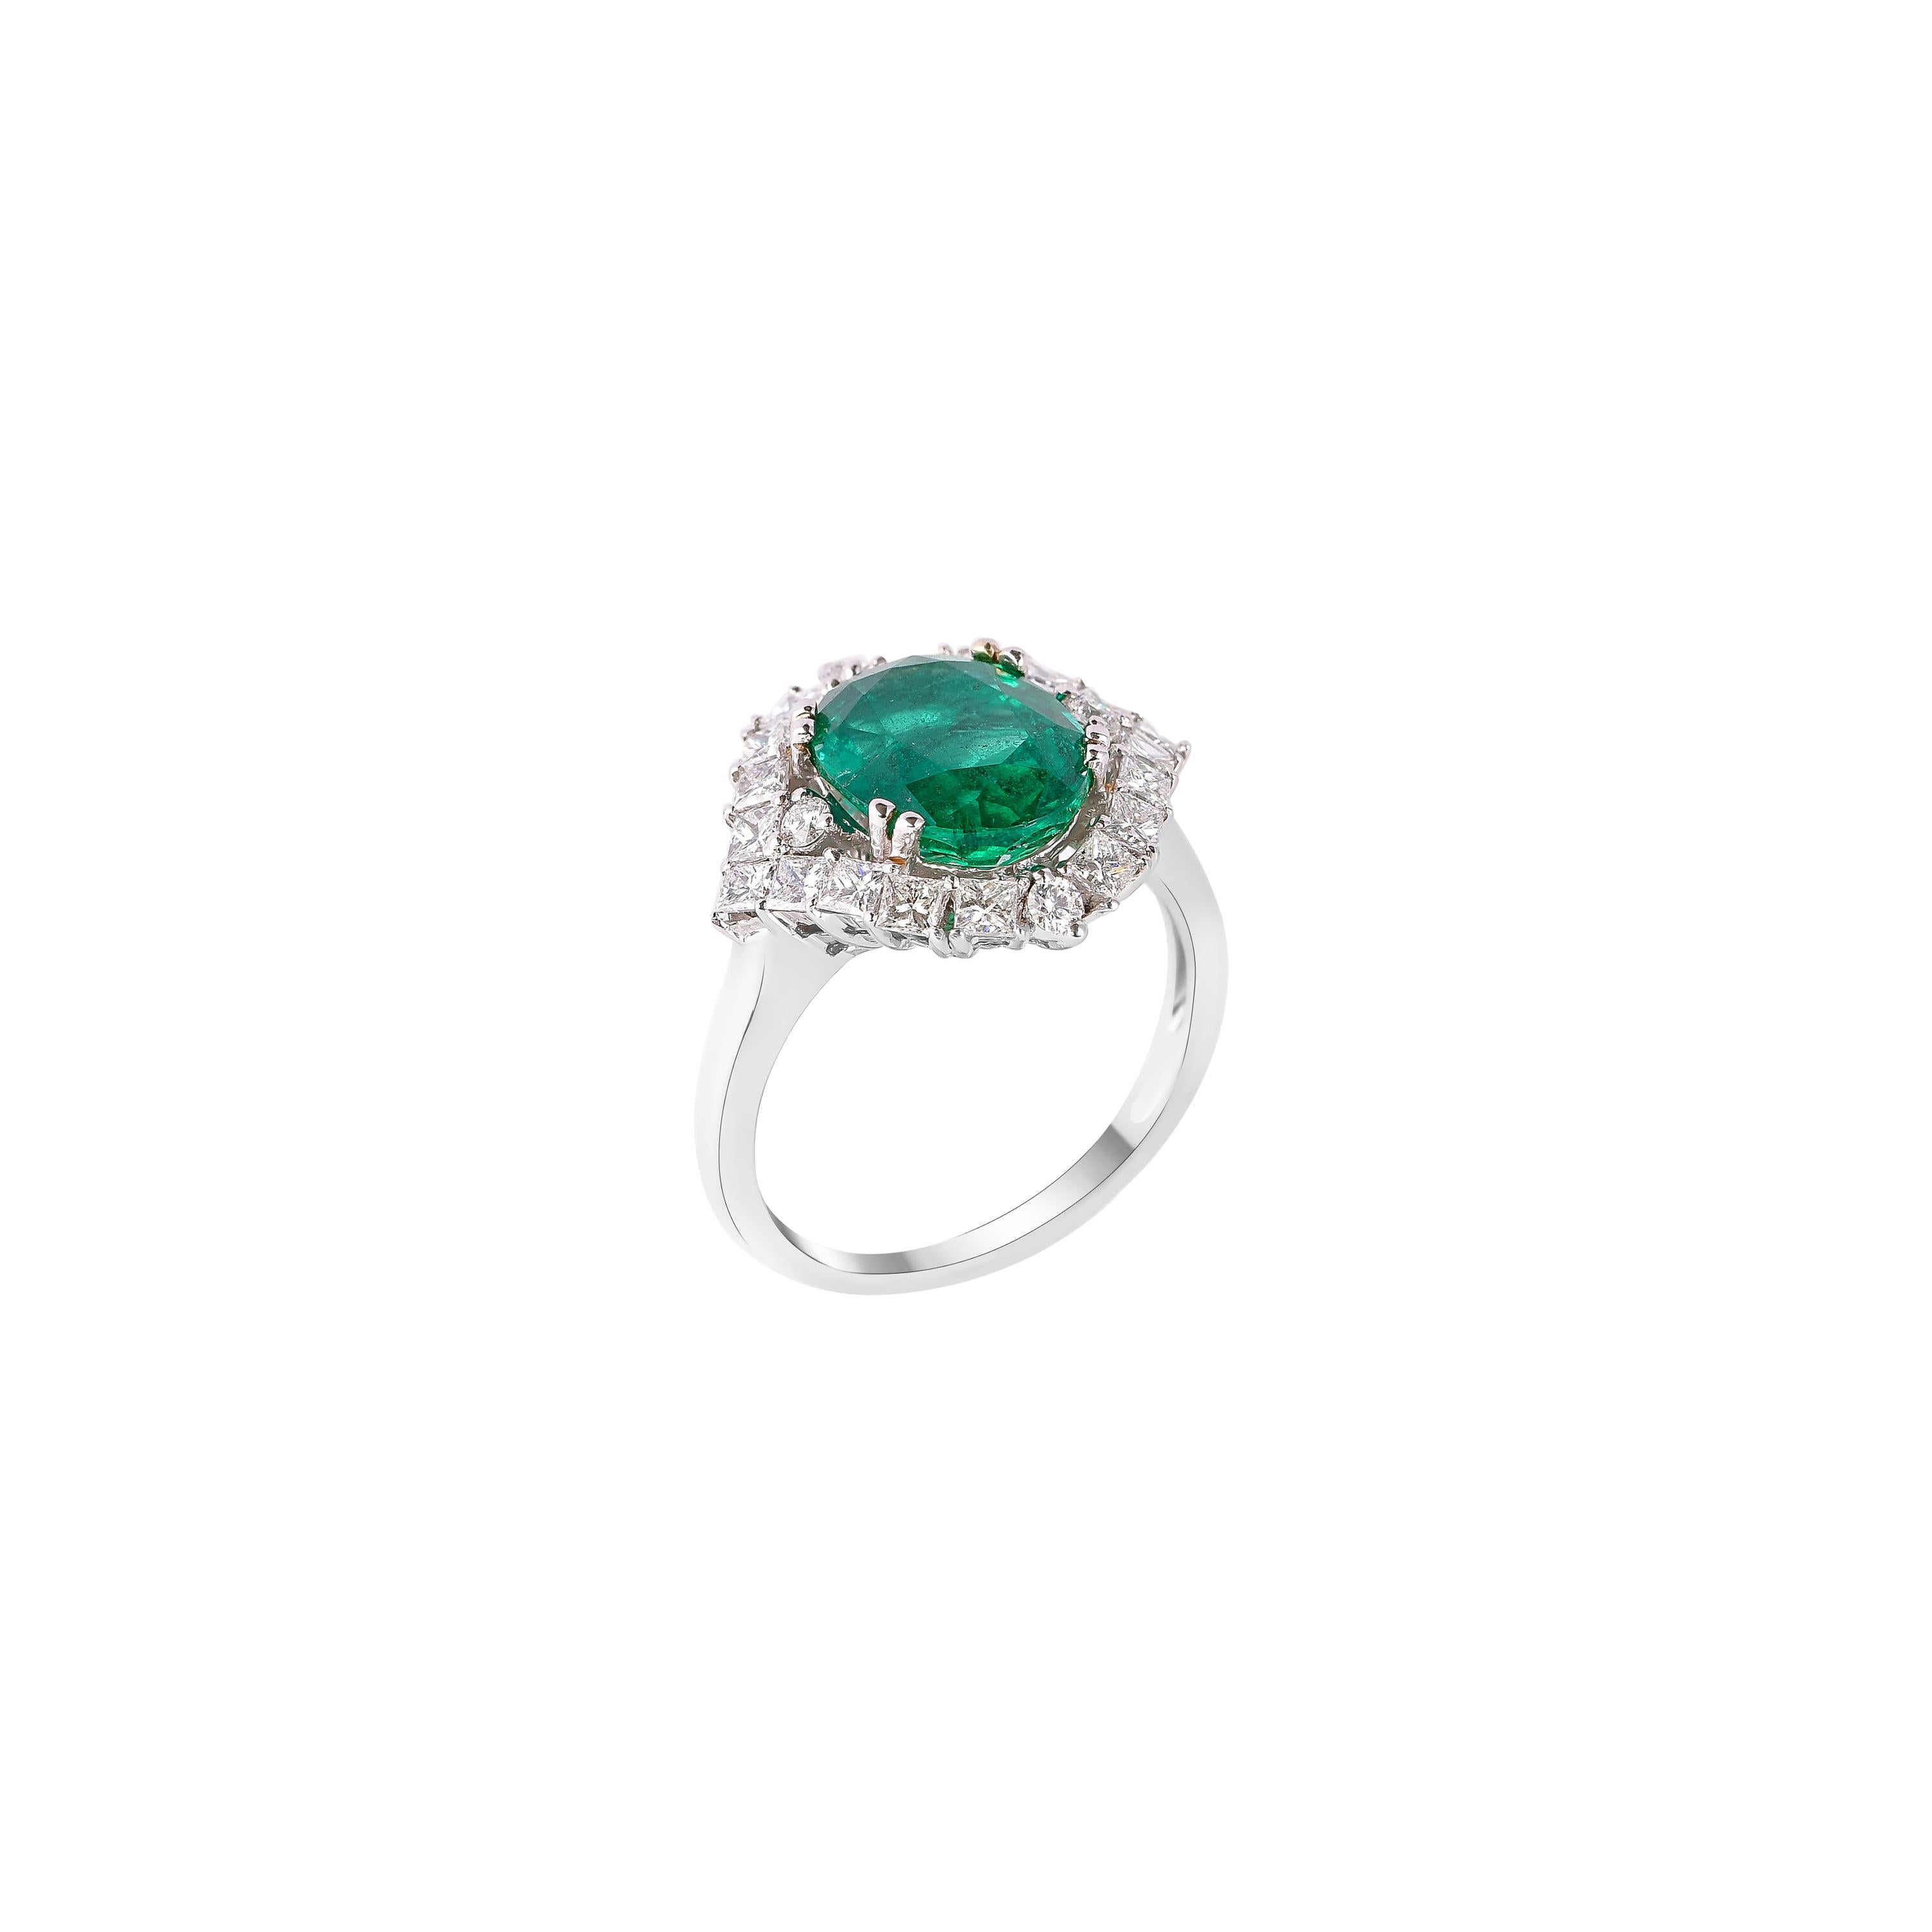 Contemporary GRS Certified 3.4 Carat Zambian Emerald and Diamond Ring in 18 Karat White Gold For Sale